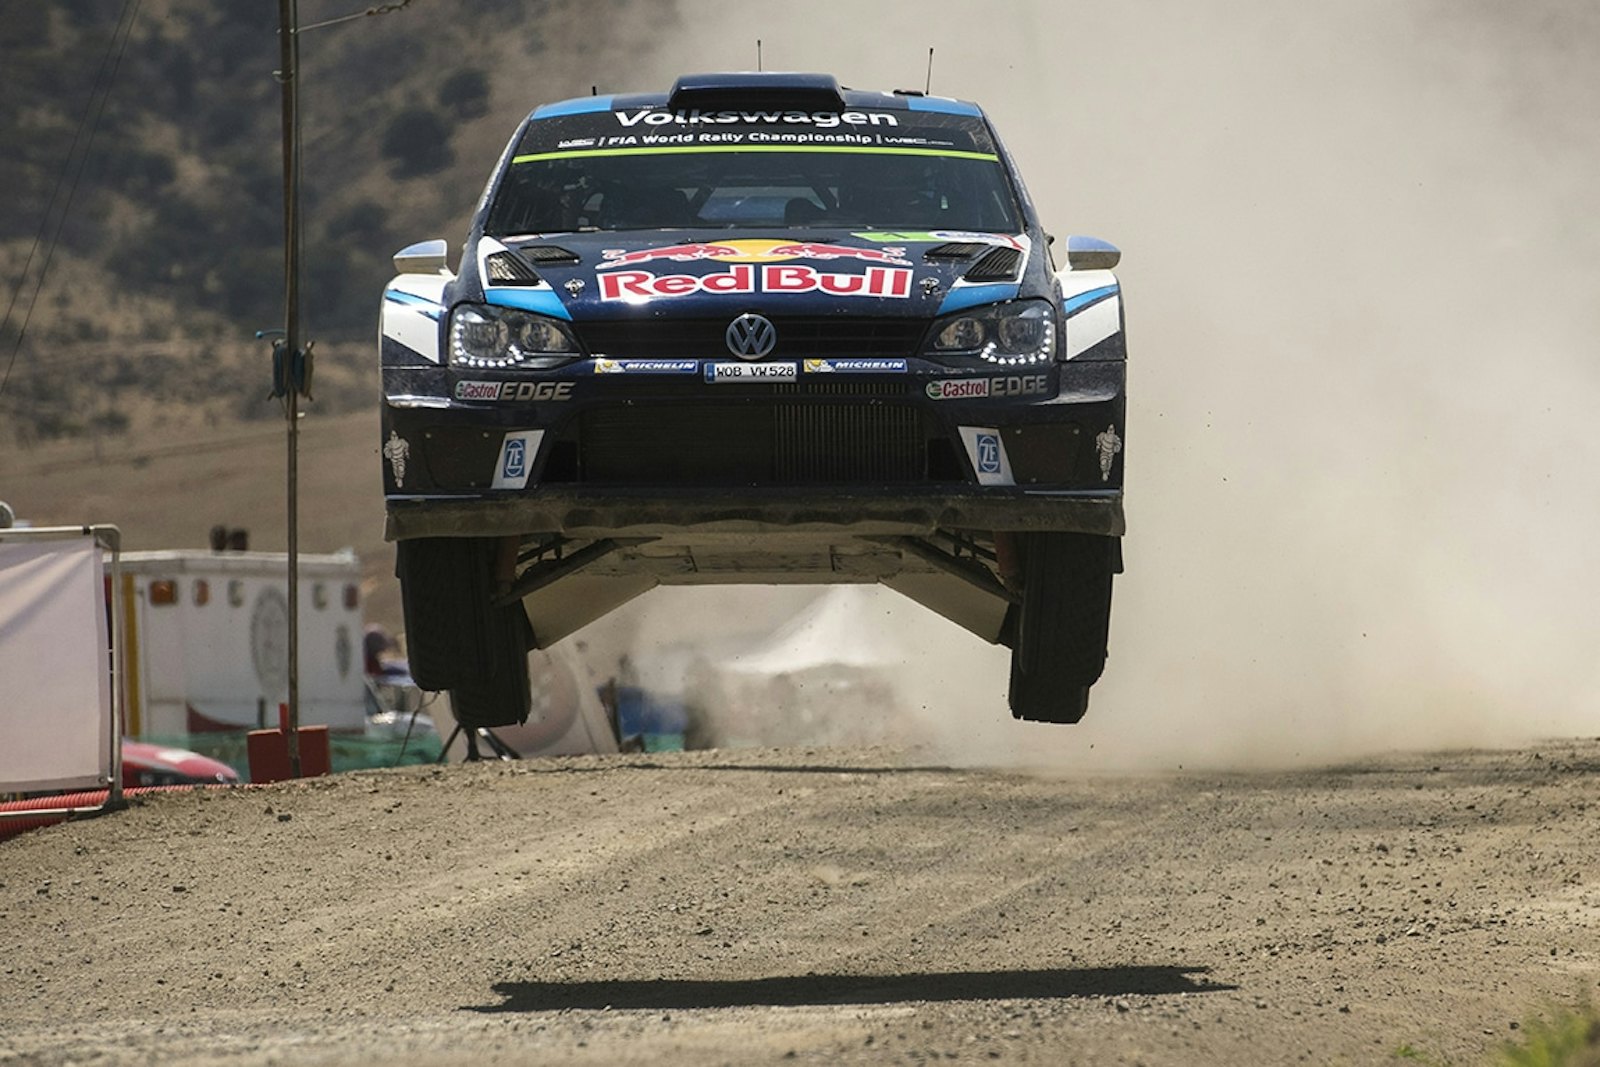 Sebastien Ogier (FRA) performs during the FIA World Rally Championship Mexico 2016 in Leon, Mexico on March 6, 2016 // Jaanus Ree/Red Bull Content Pool // P-20160306-00266 // Usage for editorial use only // Please go to www.redbullcontentpool.com for further information. //